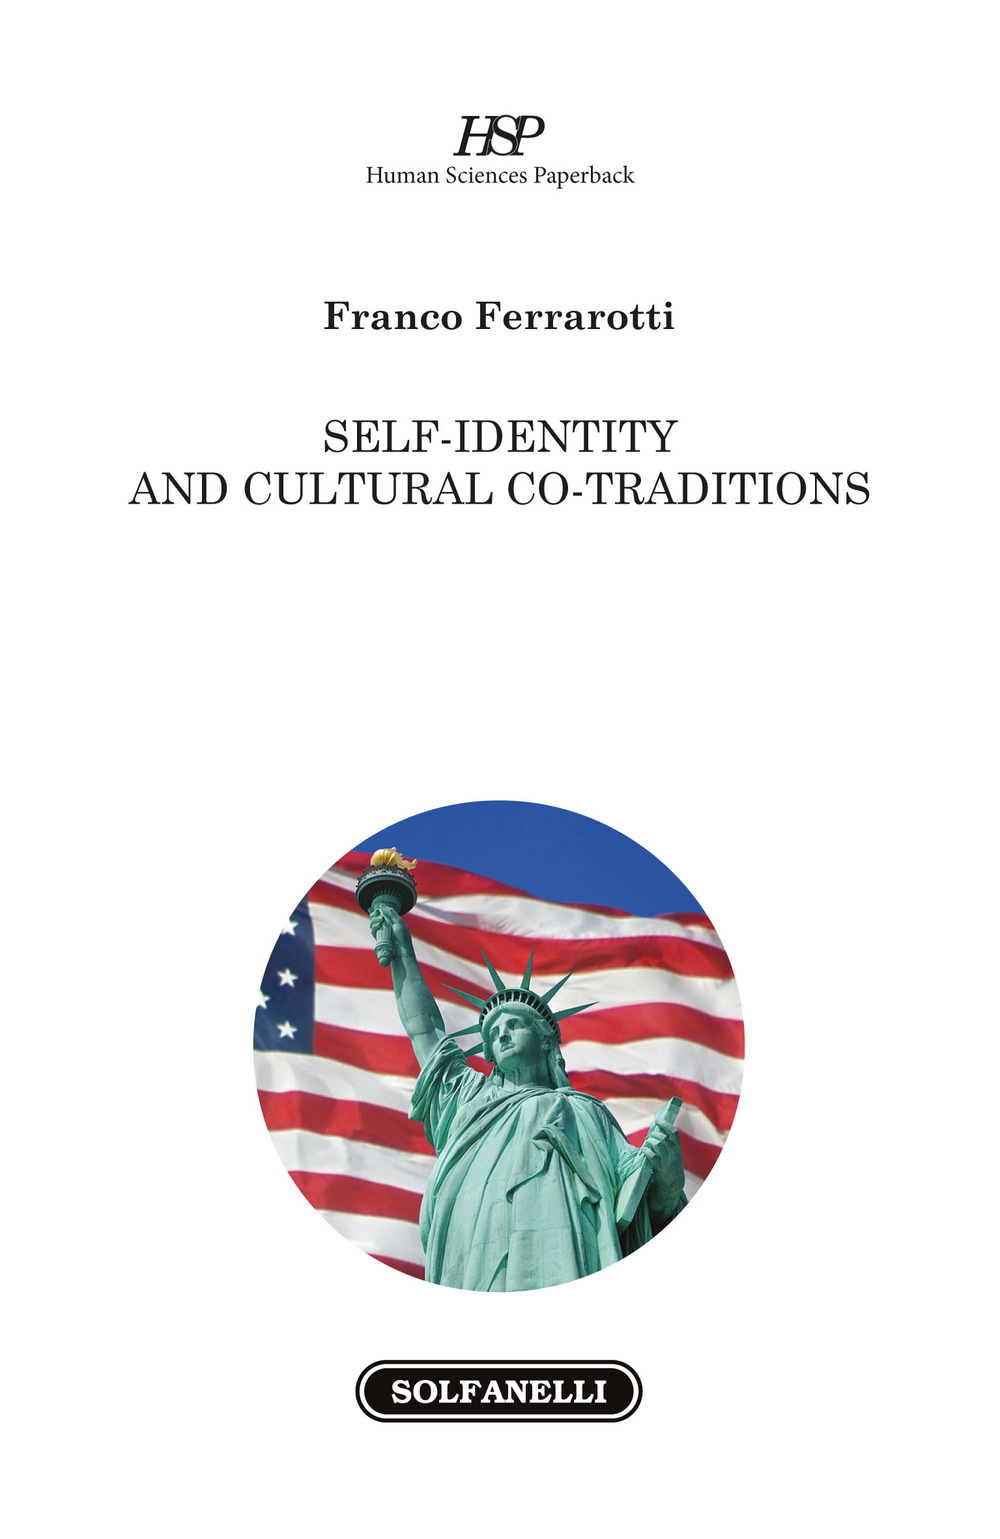 Self-identity and cultural co-traditions